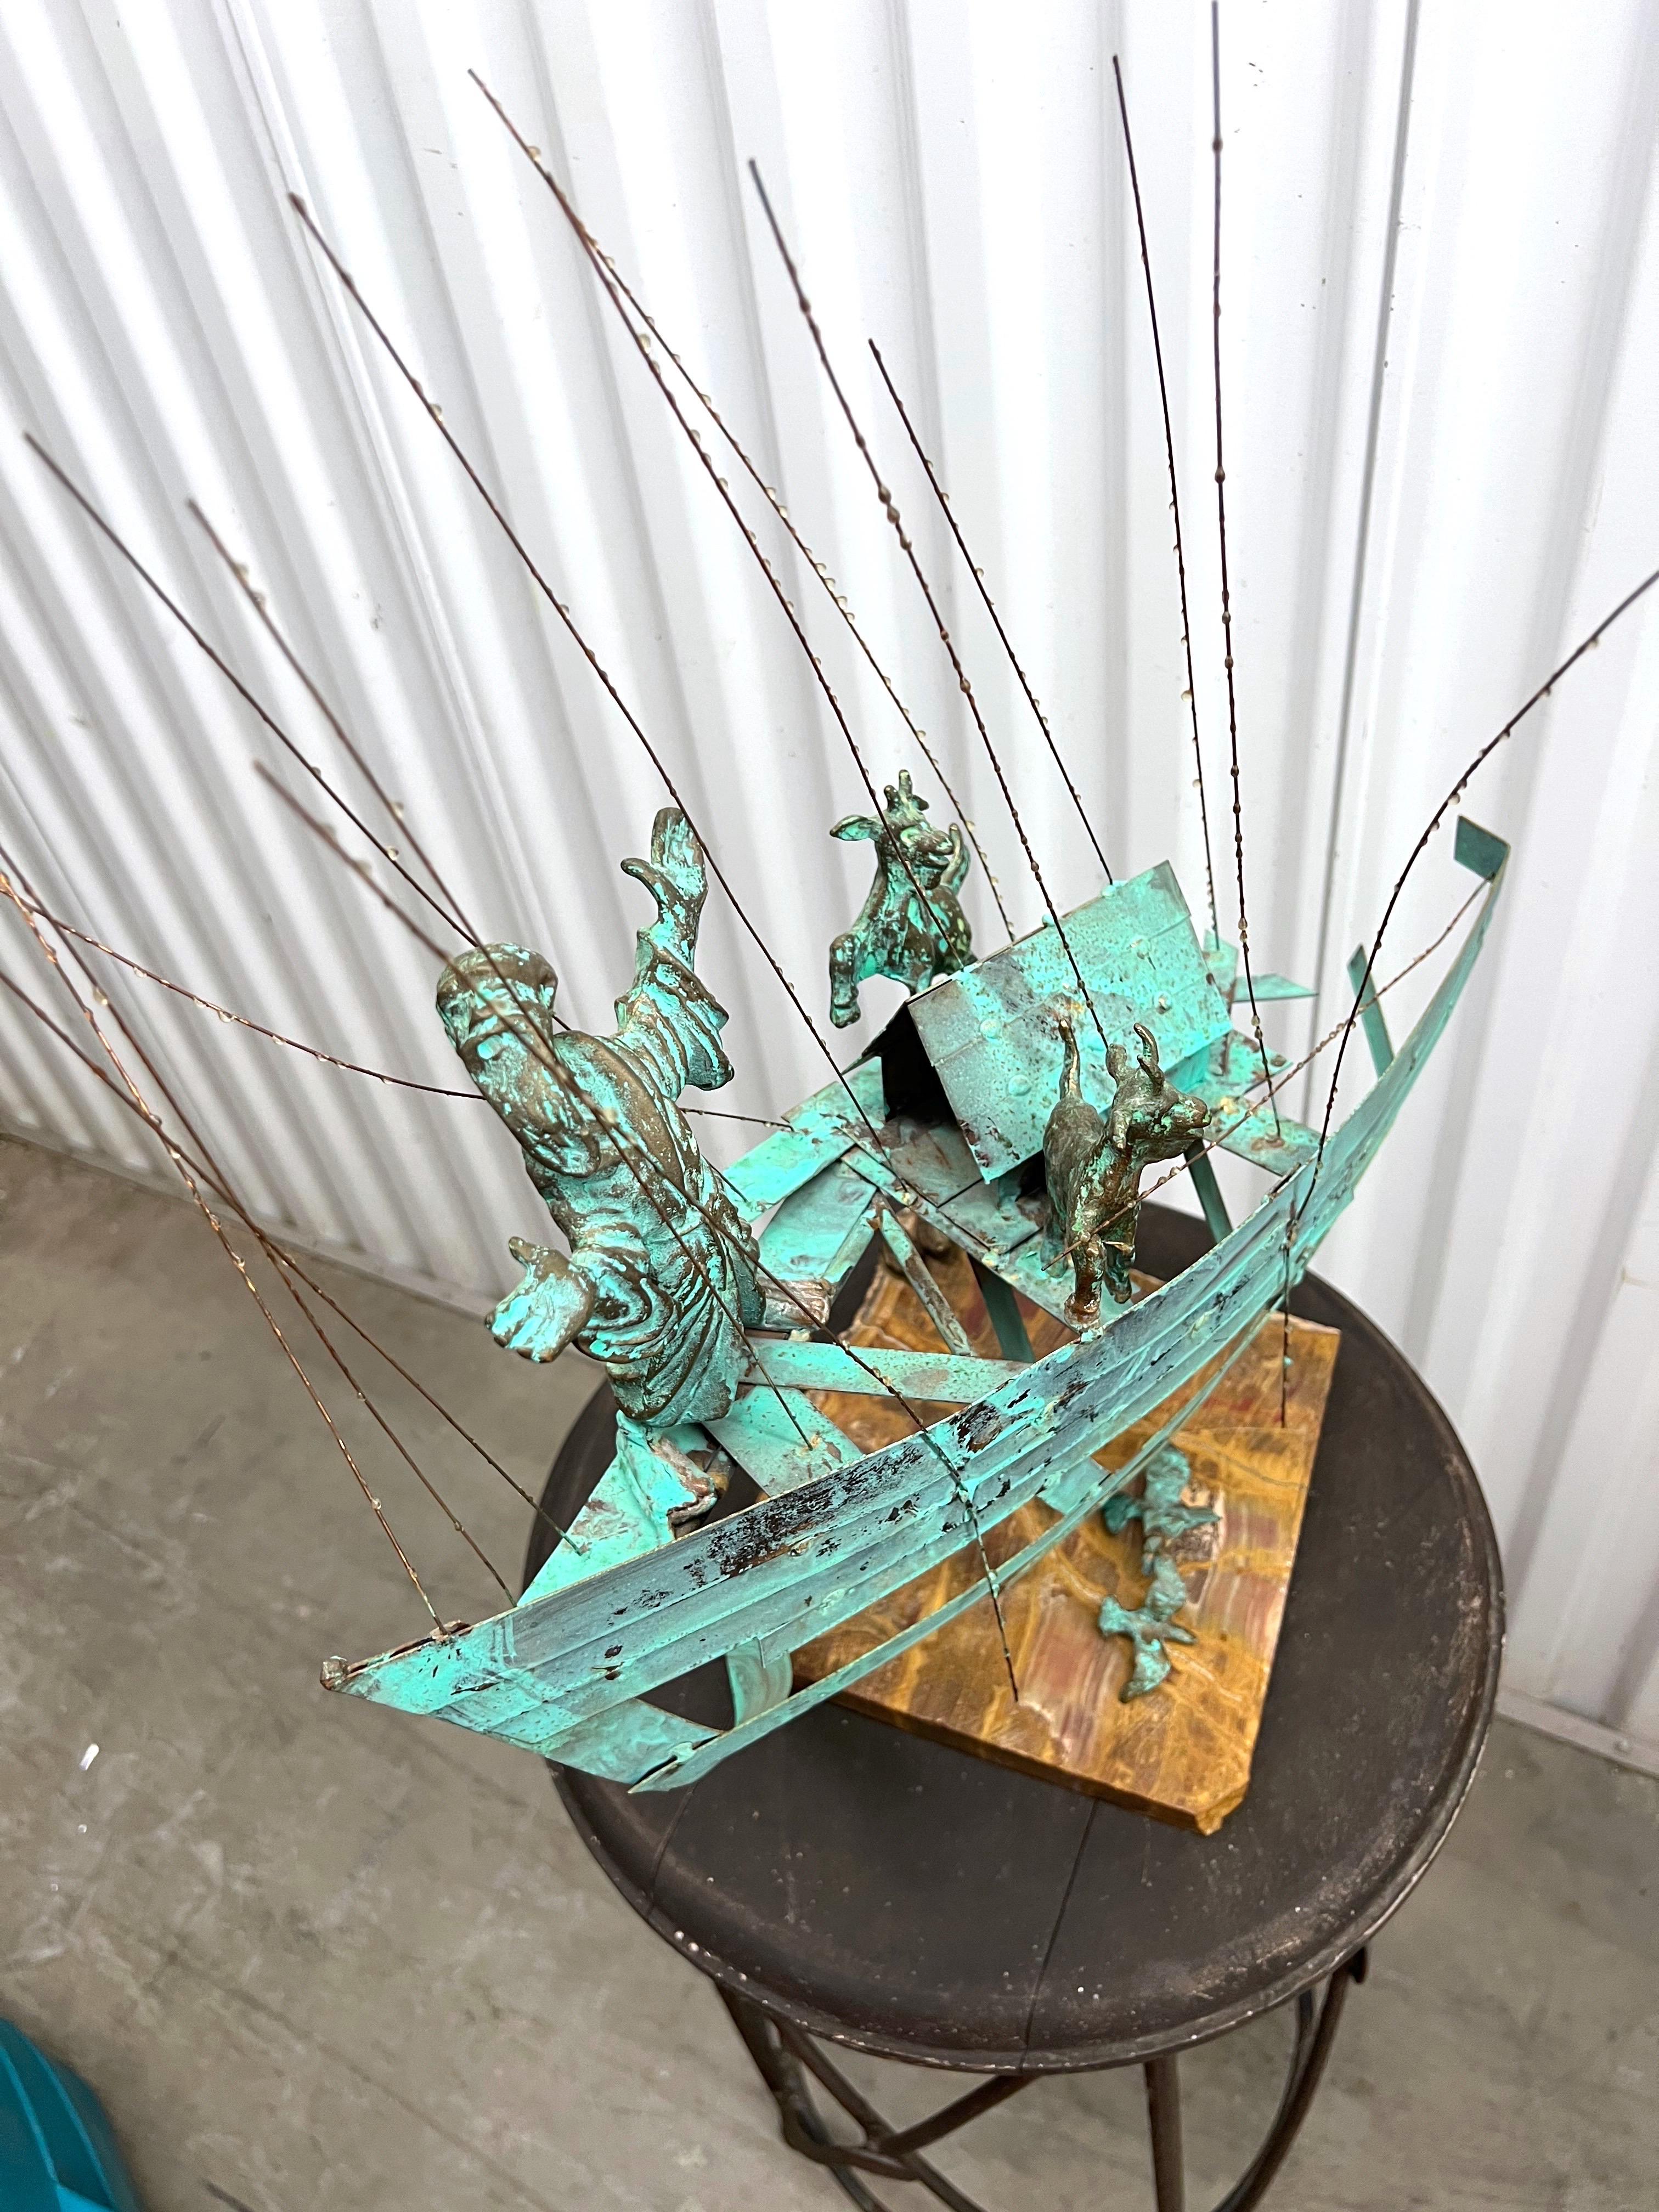 Bijan Signed Metal Art Sculpture of Man on Boat with Goats For Sale 1